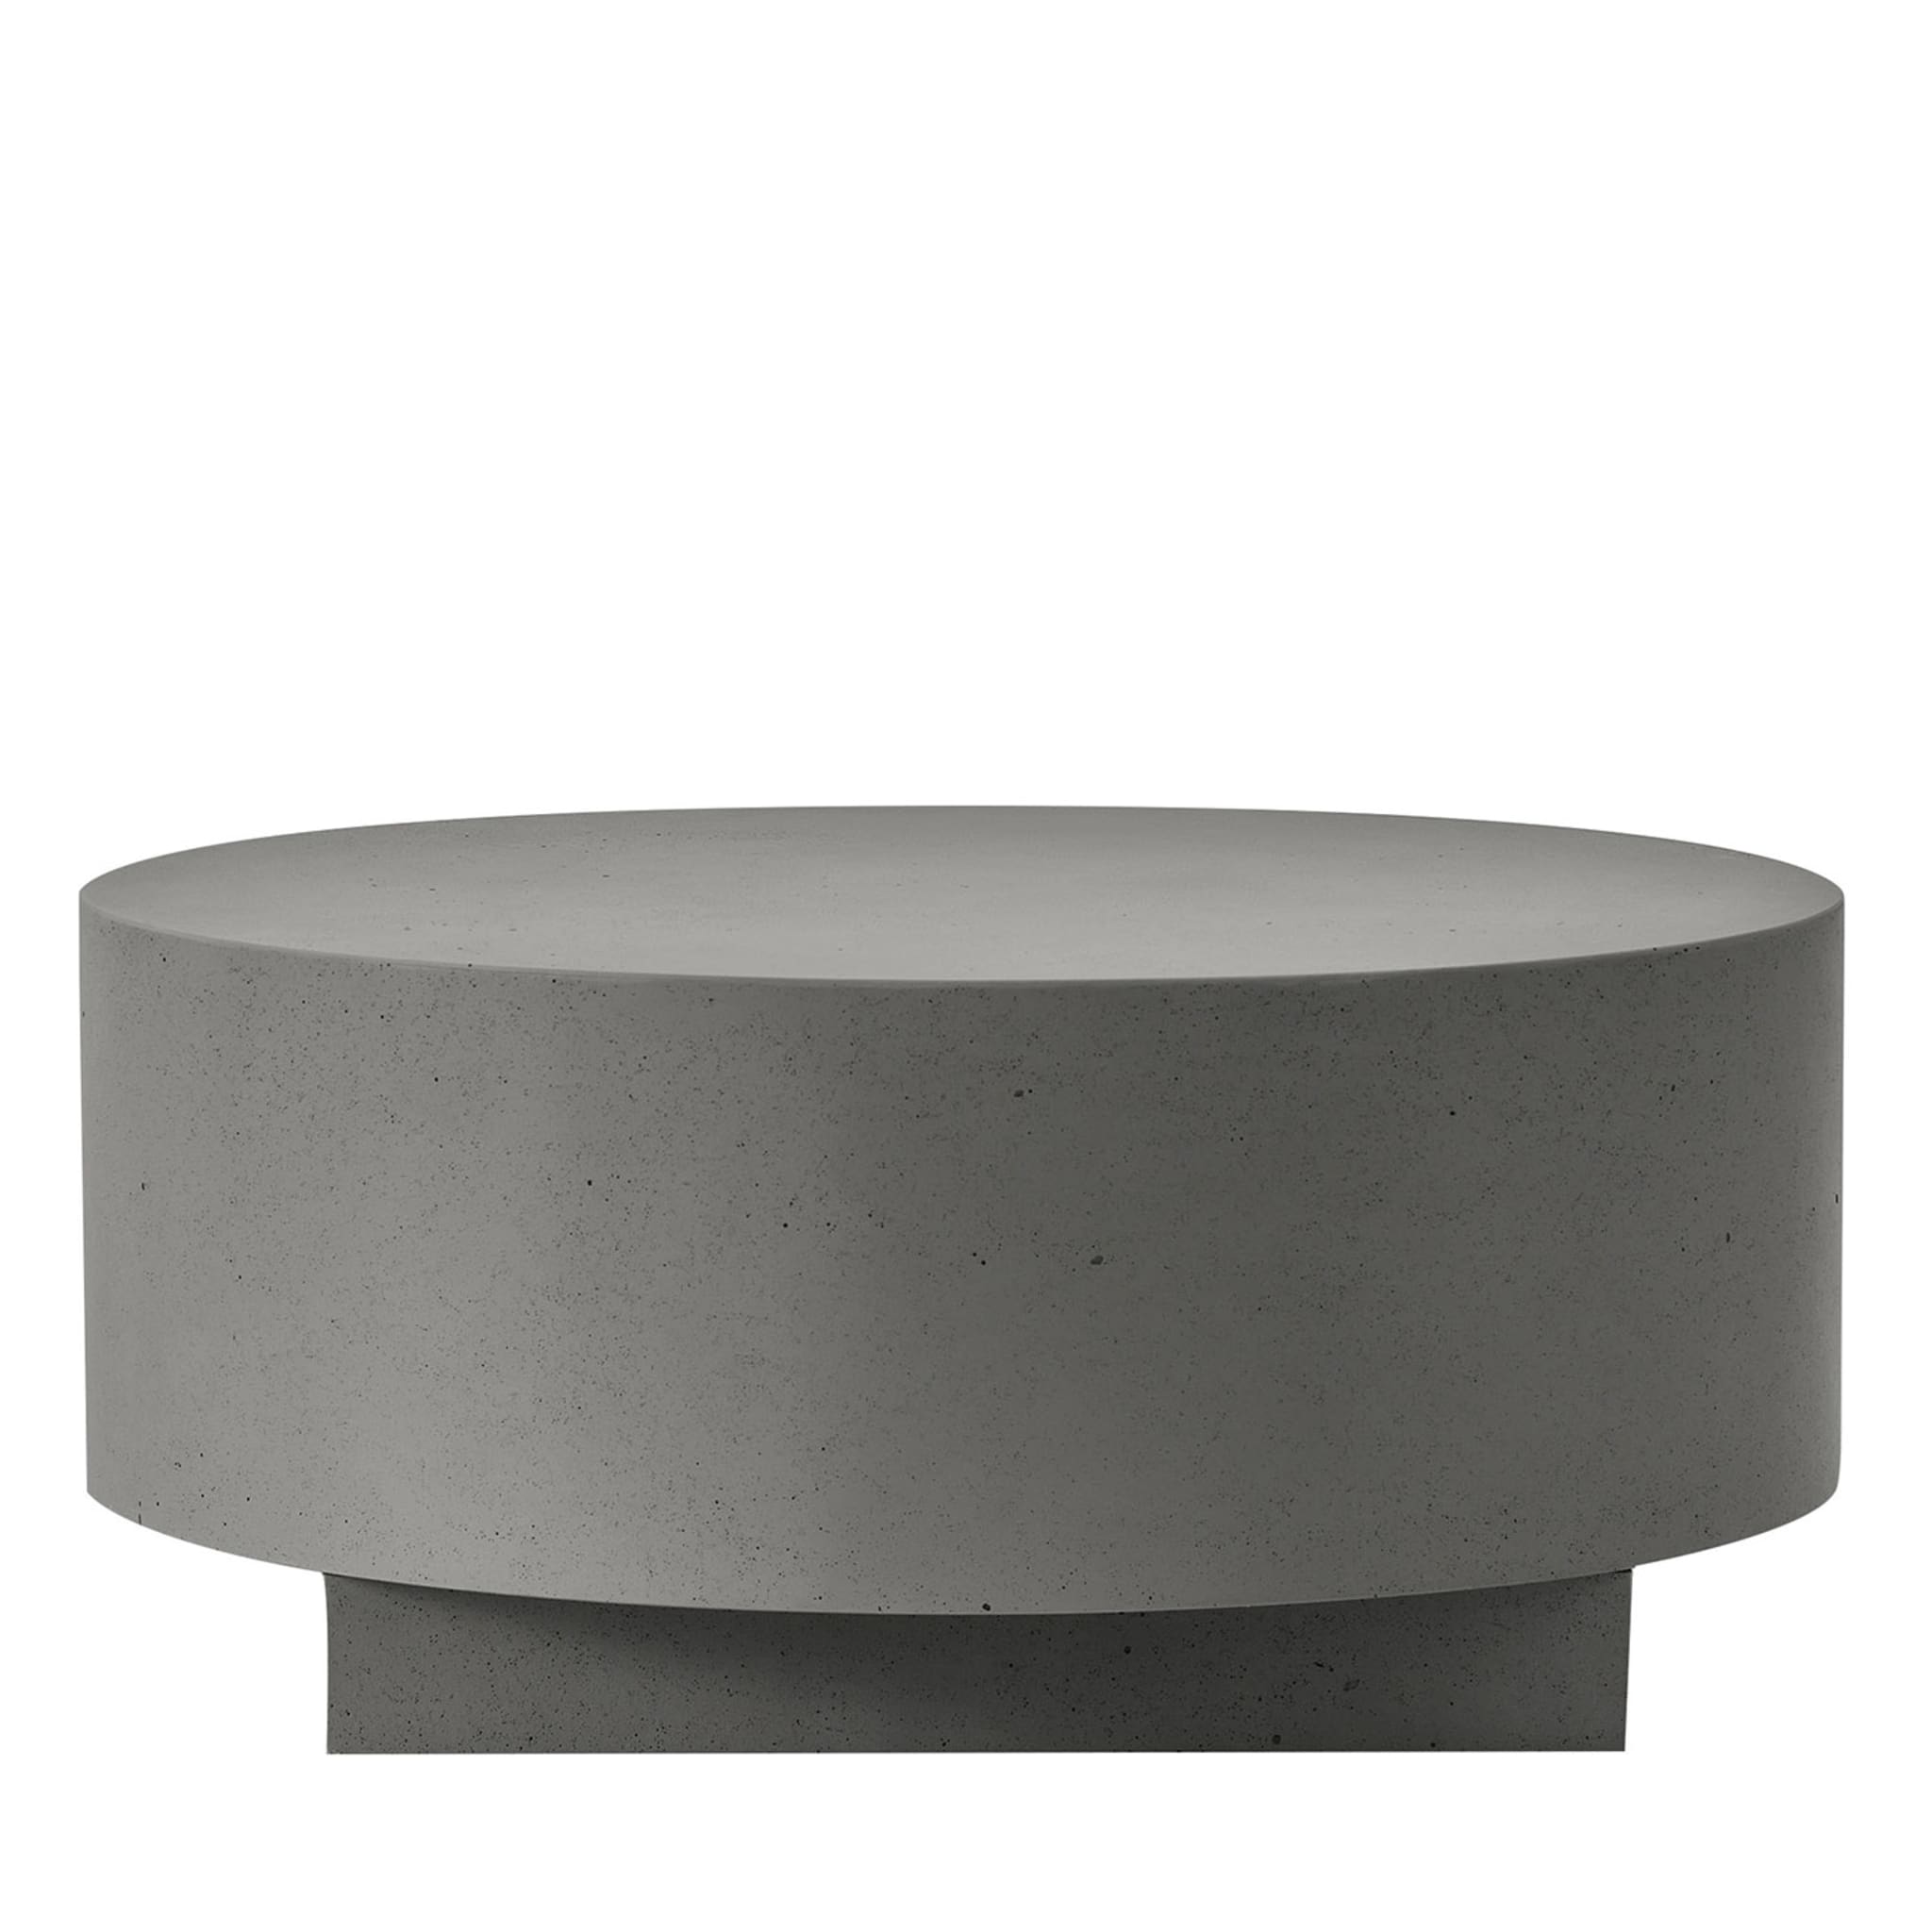 Tronchetto Coffee Table by Parisotto and Formenton - Main view